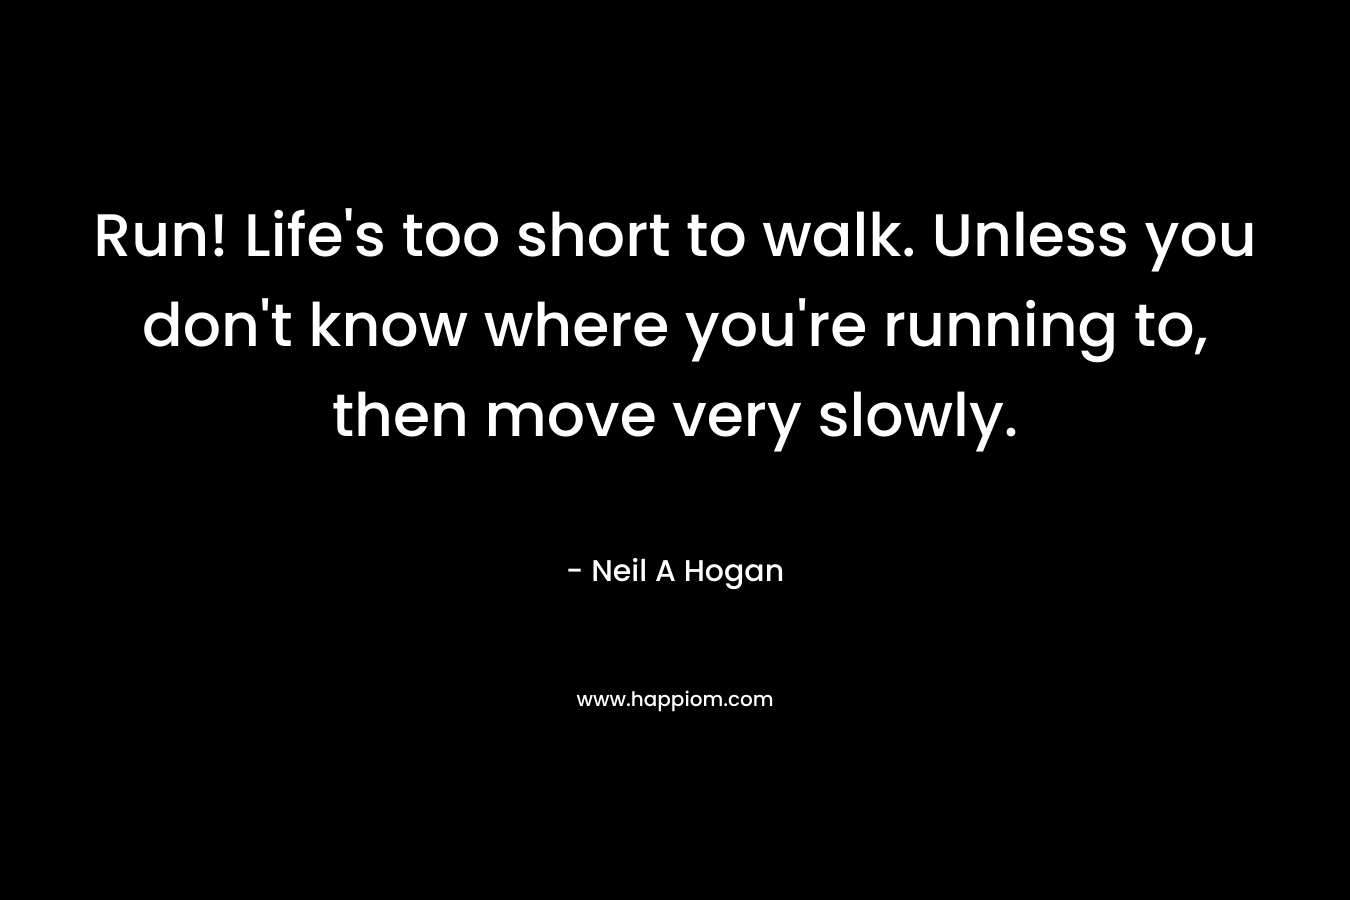 Run! Life’s too short to walk. Unless you don’t know where you’re running to, then move very slowly. – Neil A Hogan